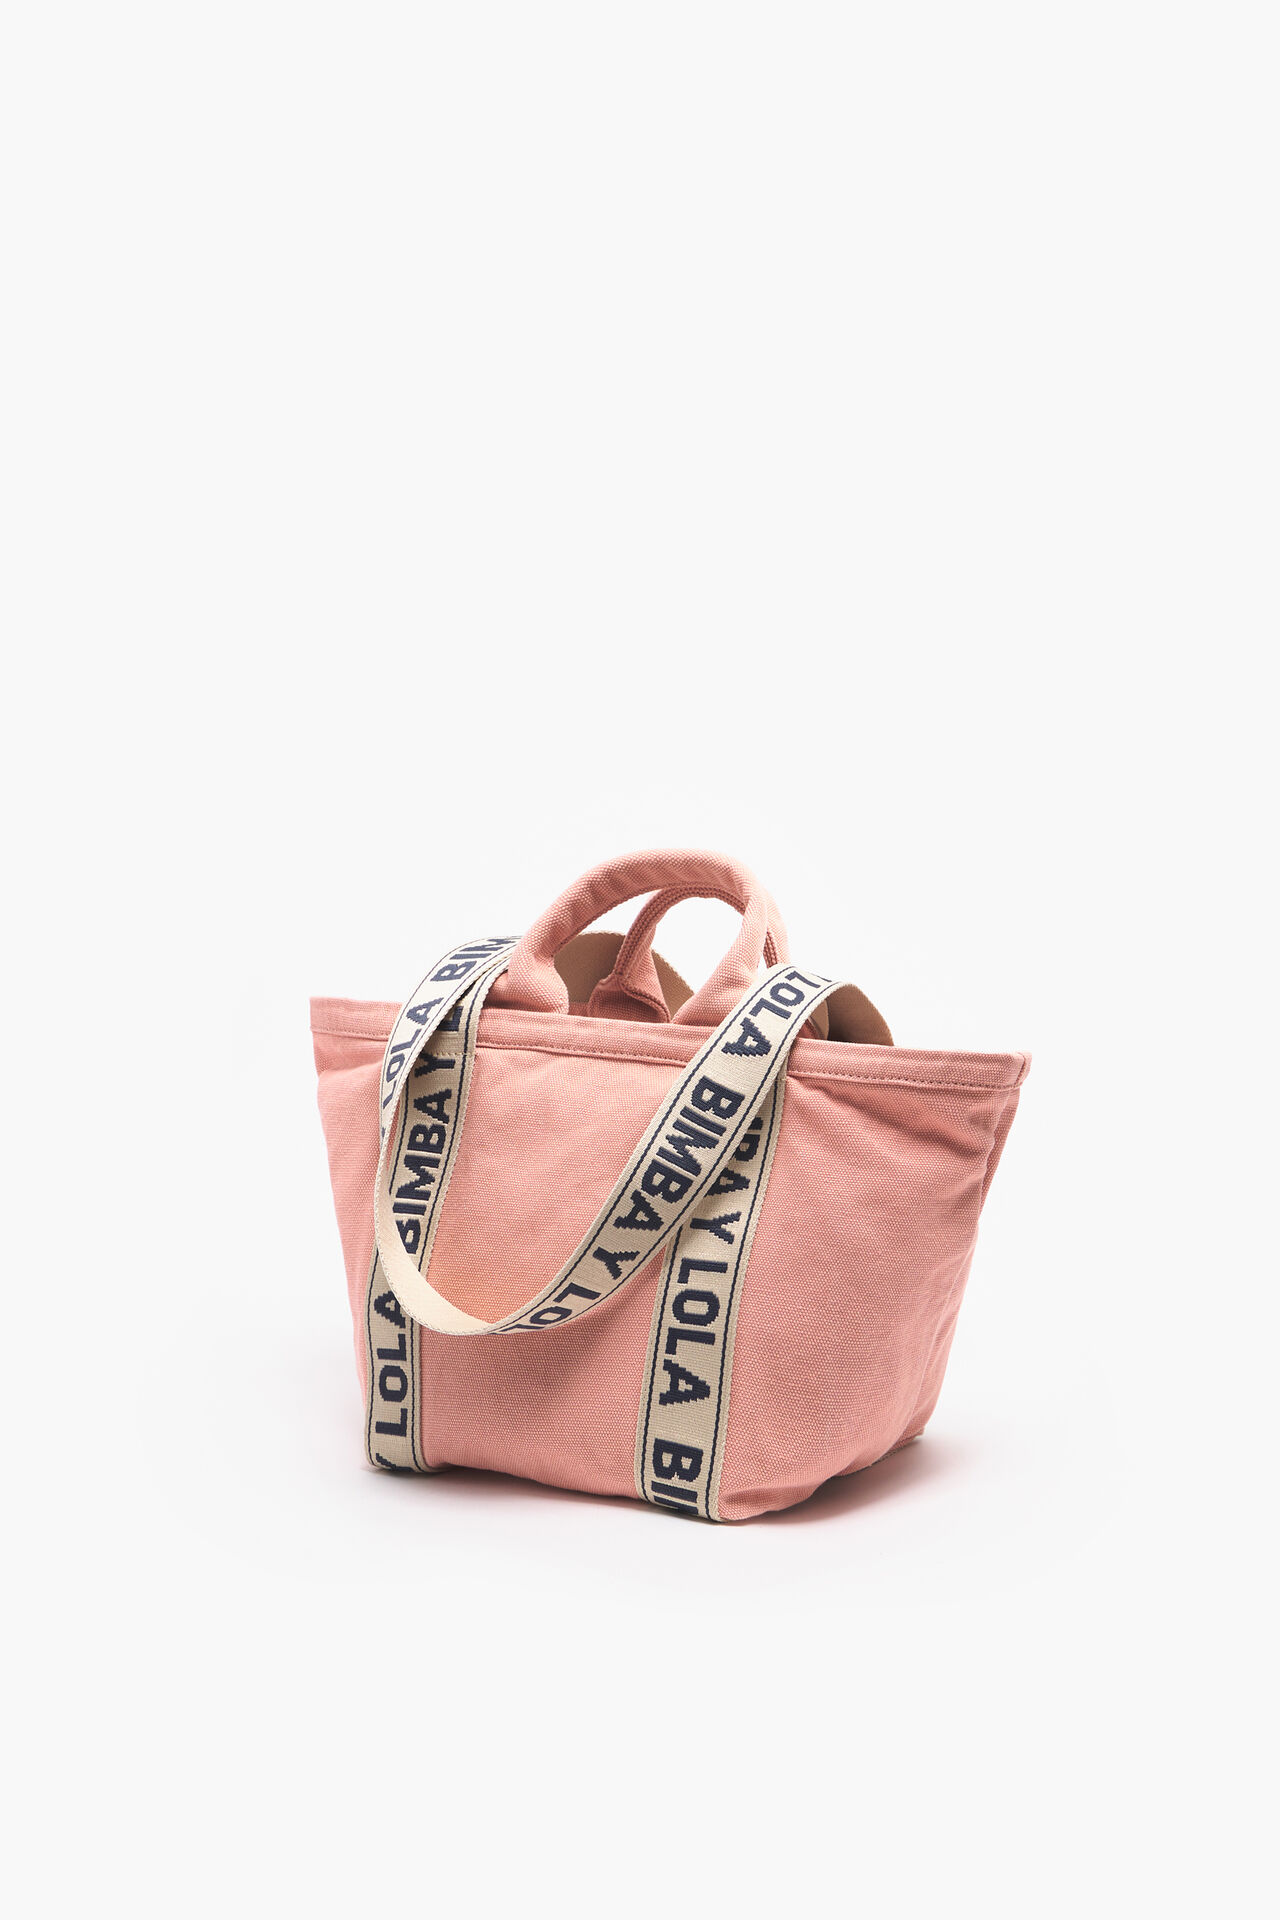 Bimba Y Lola Extra Large Canvas Shopper Bag - Pink for Women